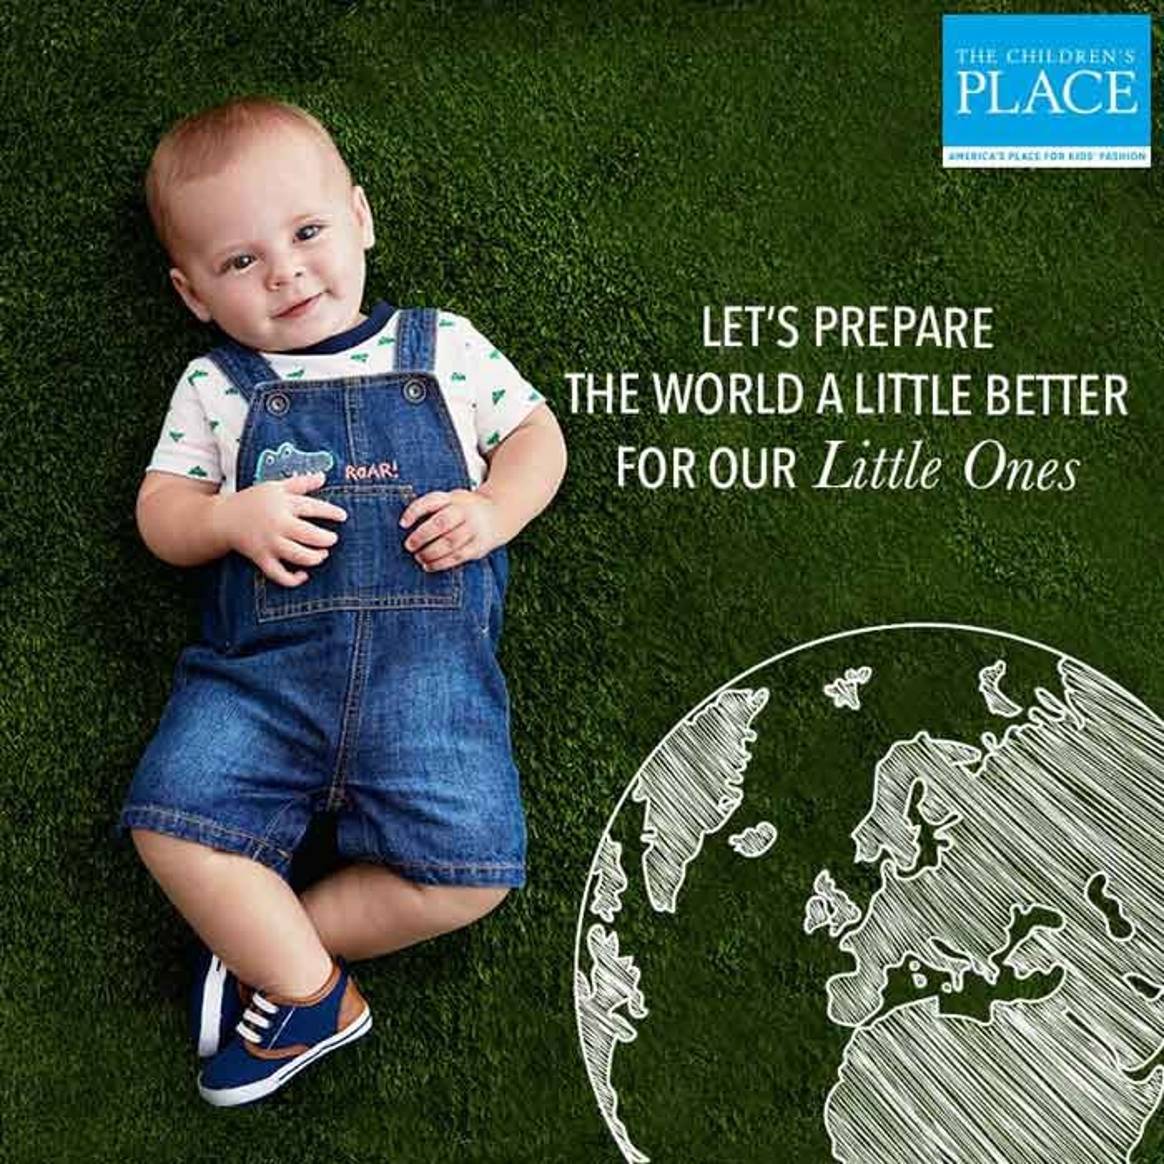 The Children’s Place sets out to woo Indian metros and smaller cities